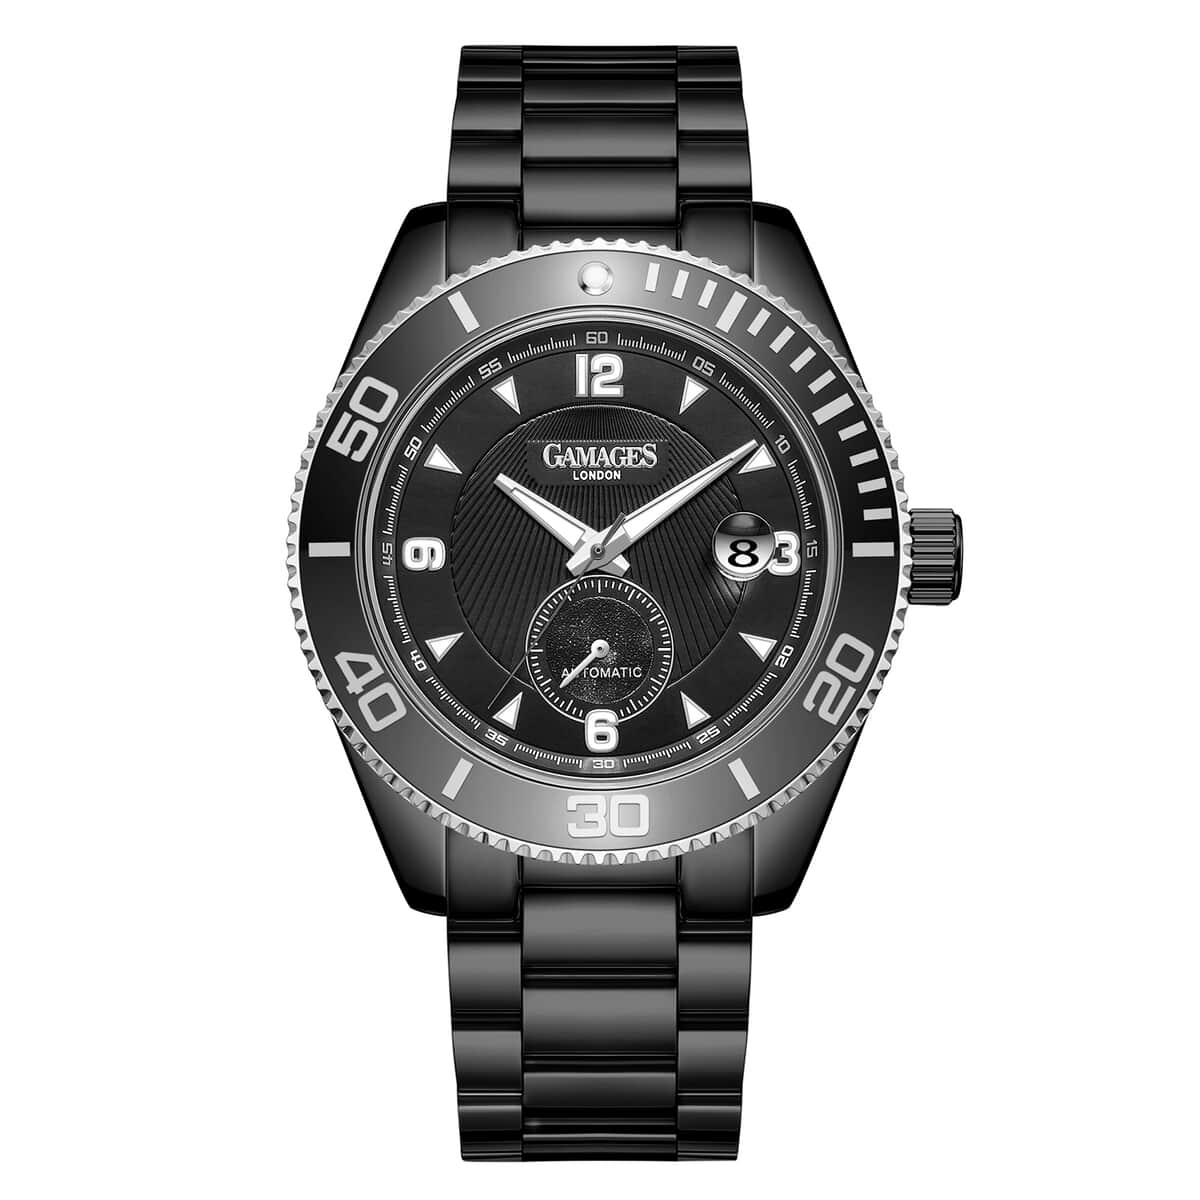 GAMAGES OF LONDON Limited Edition Hand Assembled Vibrant Sports Automatic Movement Watch in ION Plated Black Stainless Steel (45mm) FREE GIFT PEN image number 0